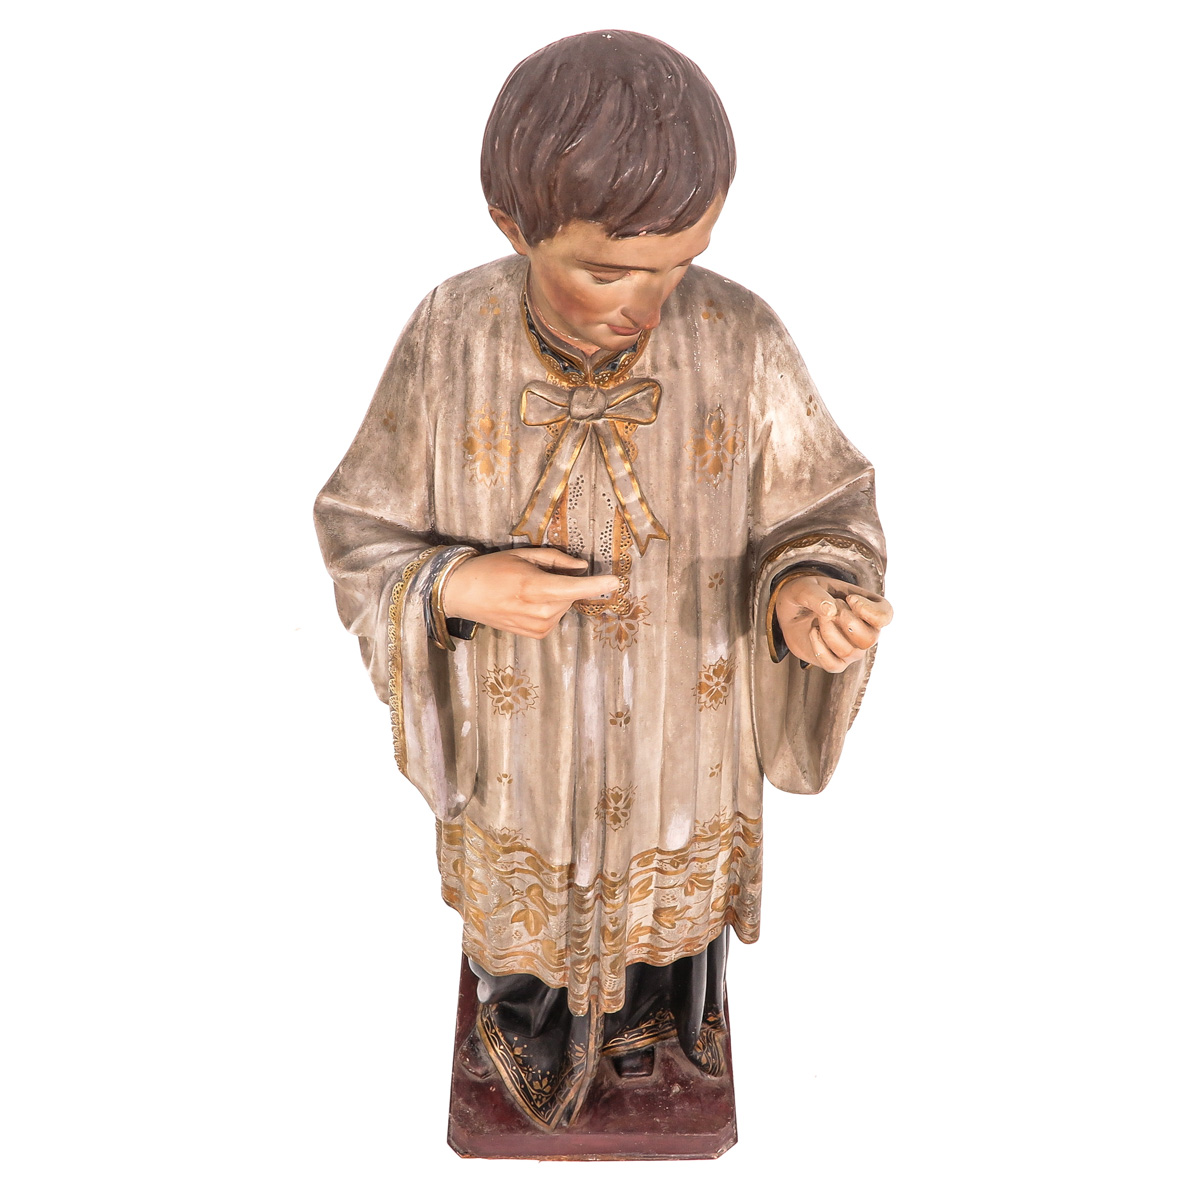 A 19th Century Sculpture of Priest - Image 5 of 10